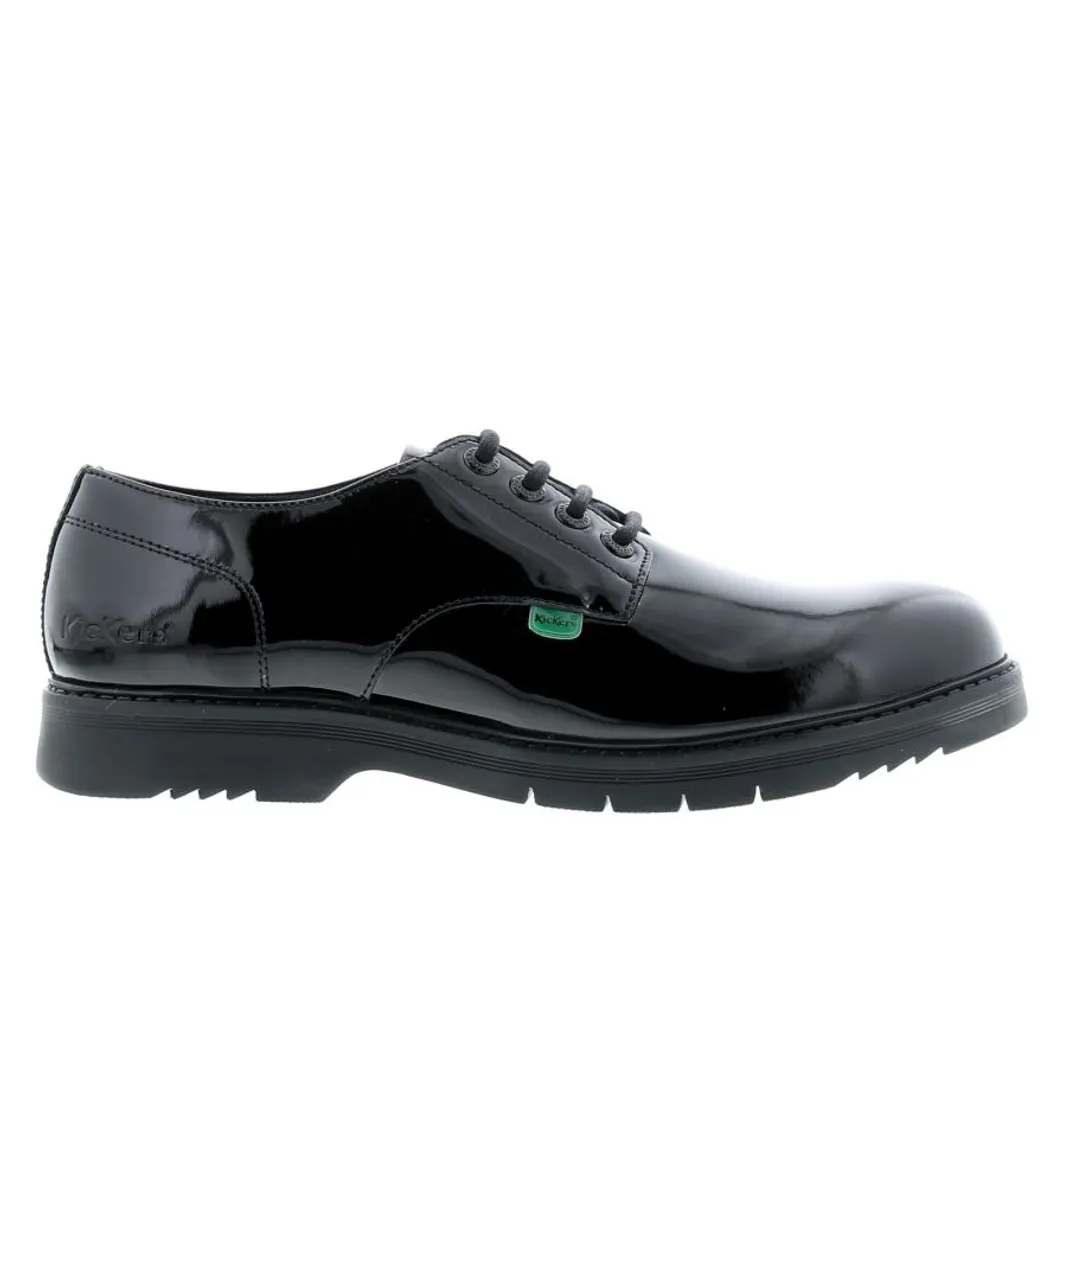 Kickers Womenss Finley Lace Up Patent Shoes in Black Leather